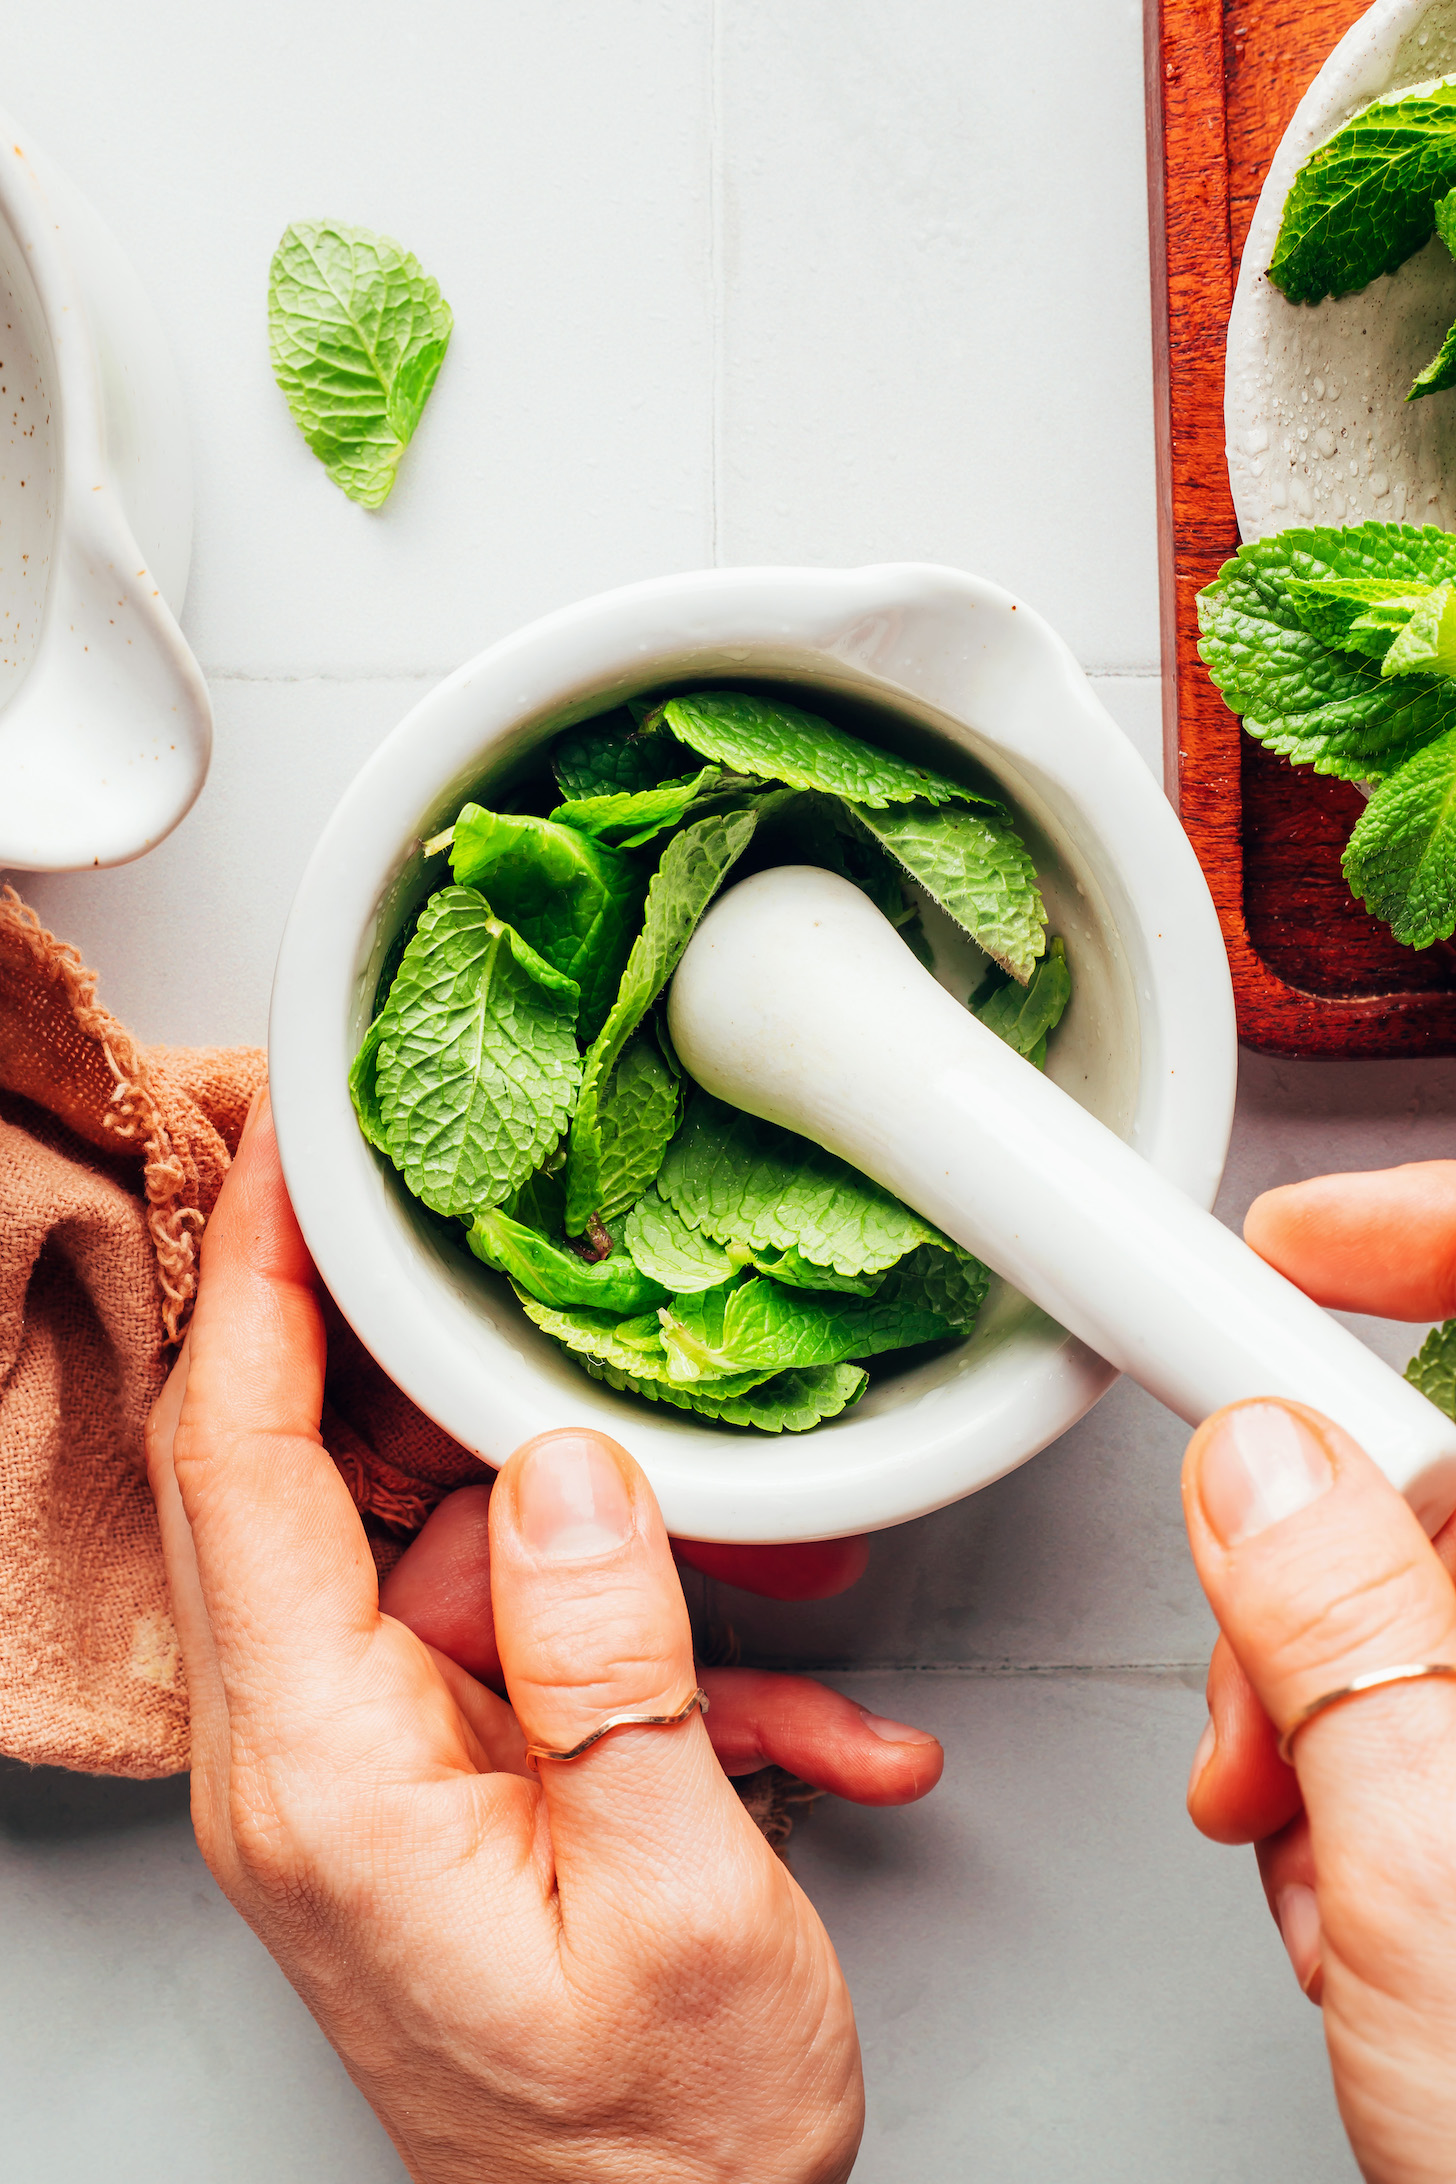 Using a mortar and pestle to muddle mint leaves